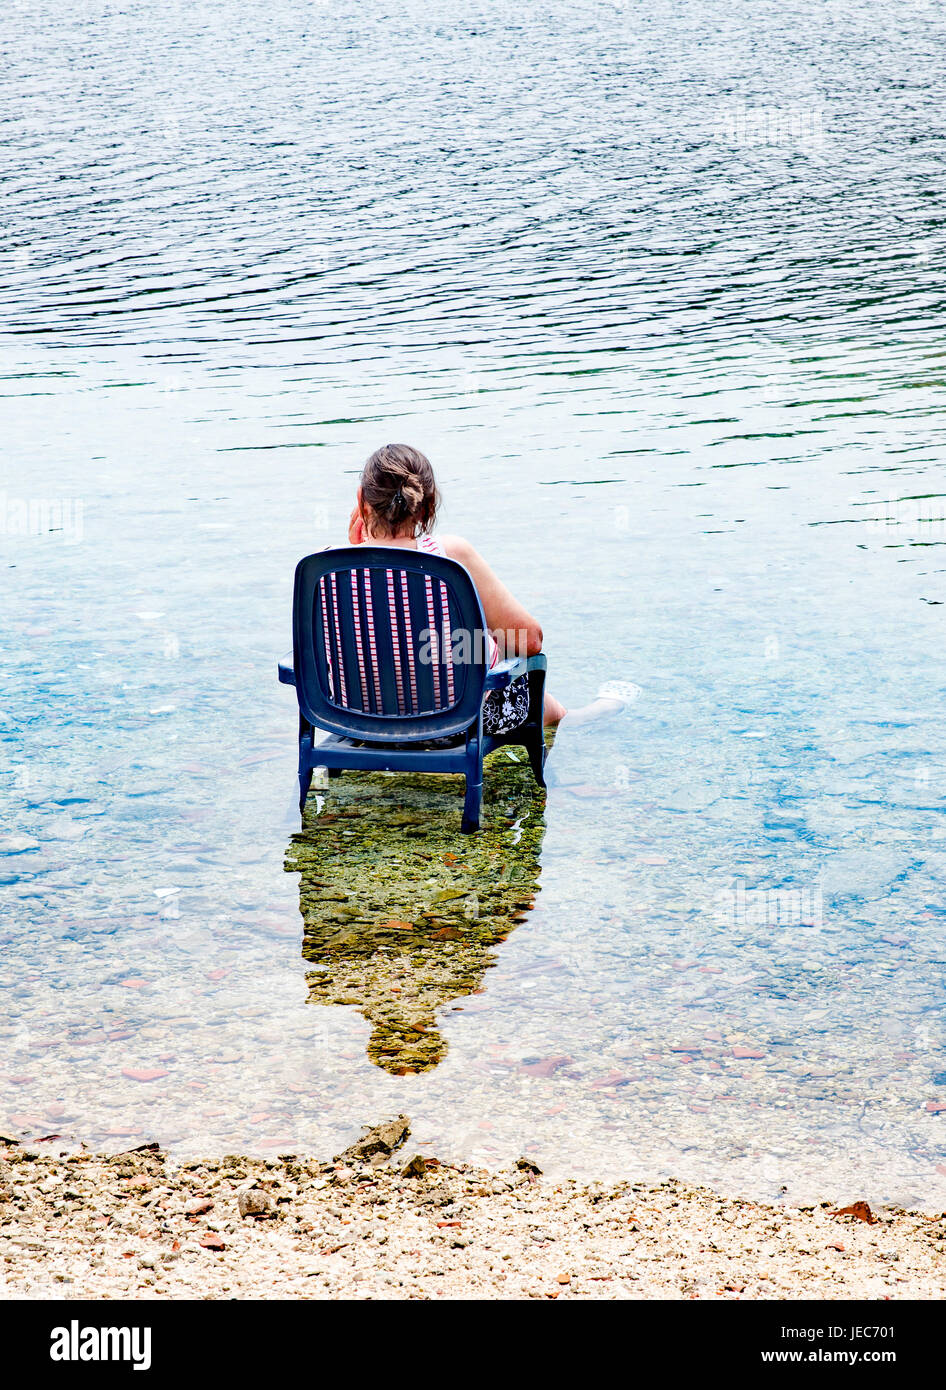 A woman cools off at the beach on a hot day by sitting in a garden chair with her legs in the sea - Croatia Stock Photo